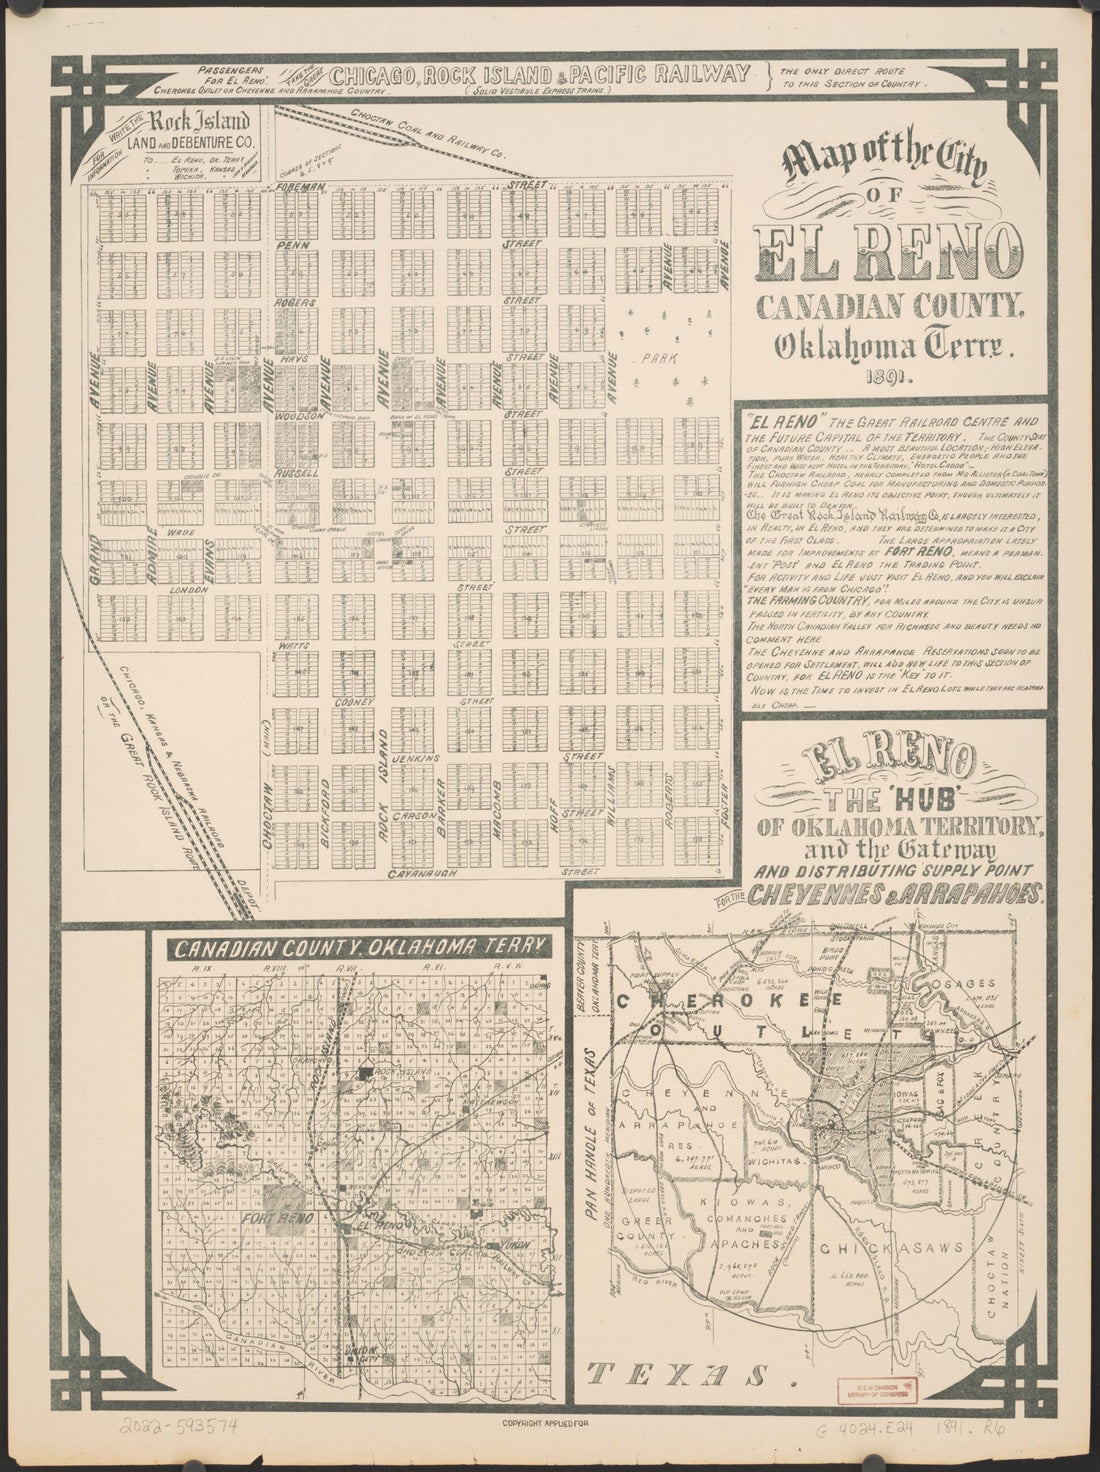 This old map of Map of the City of El Reno, Canadian County, Oklahoma Terry. from 1891 was created by  Rock Island Land and Debenture Co in 1891